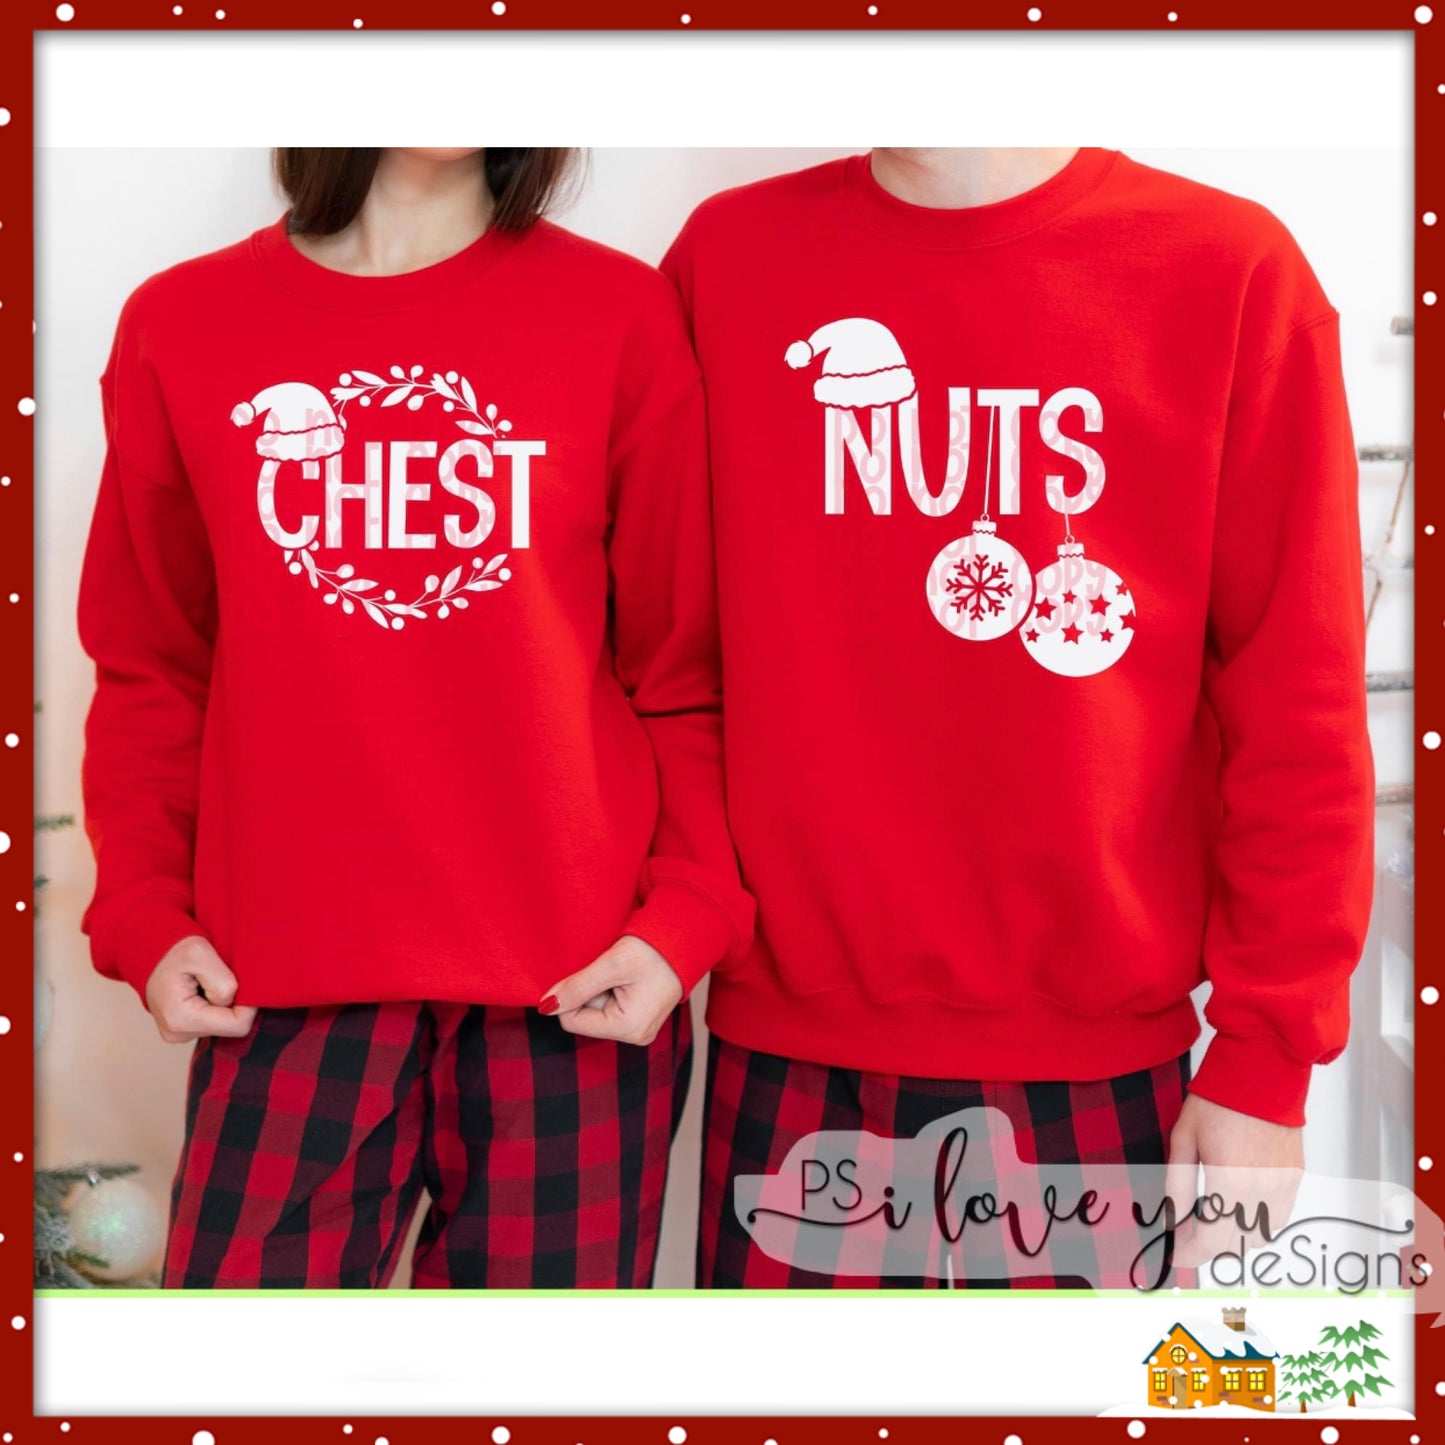 Chest and Nuts Christmas Crews